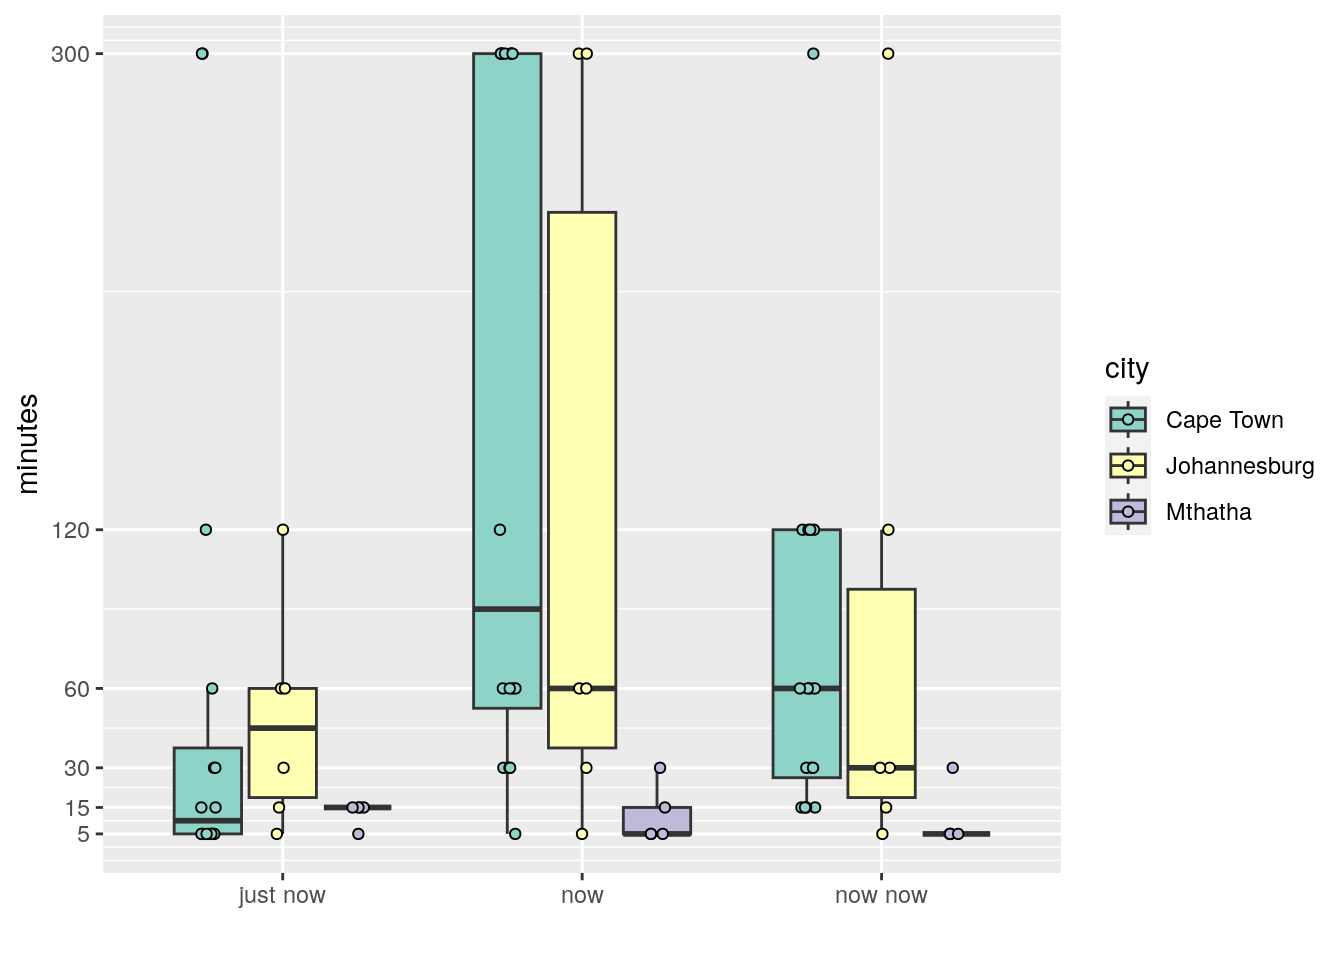 Boxplots showing the distribution of times by city.